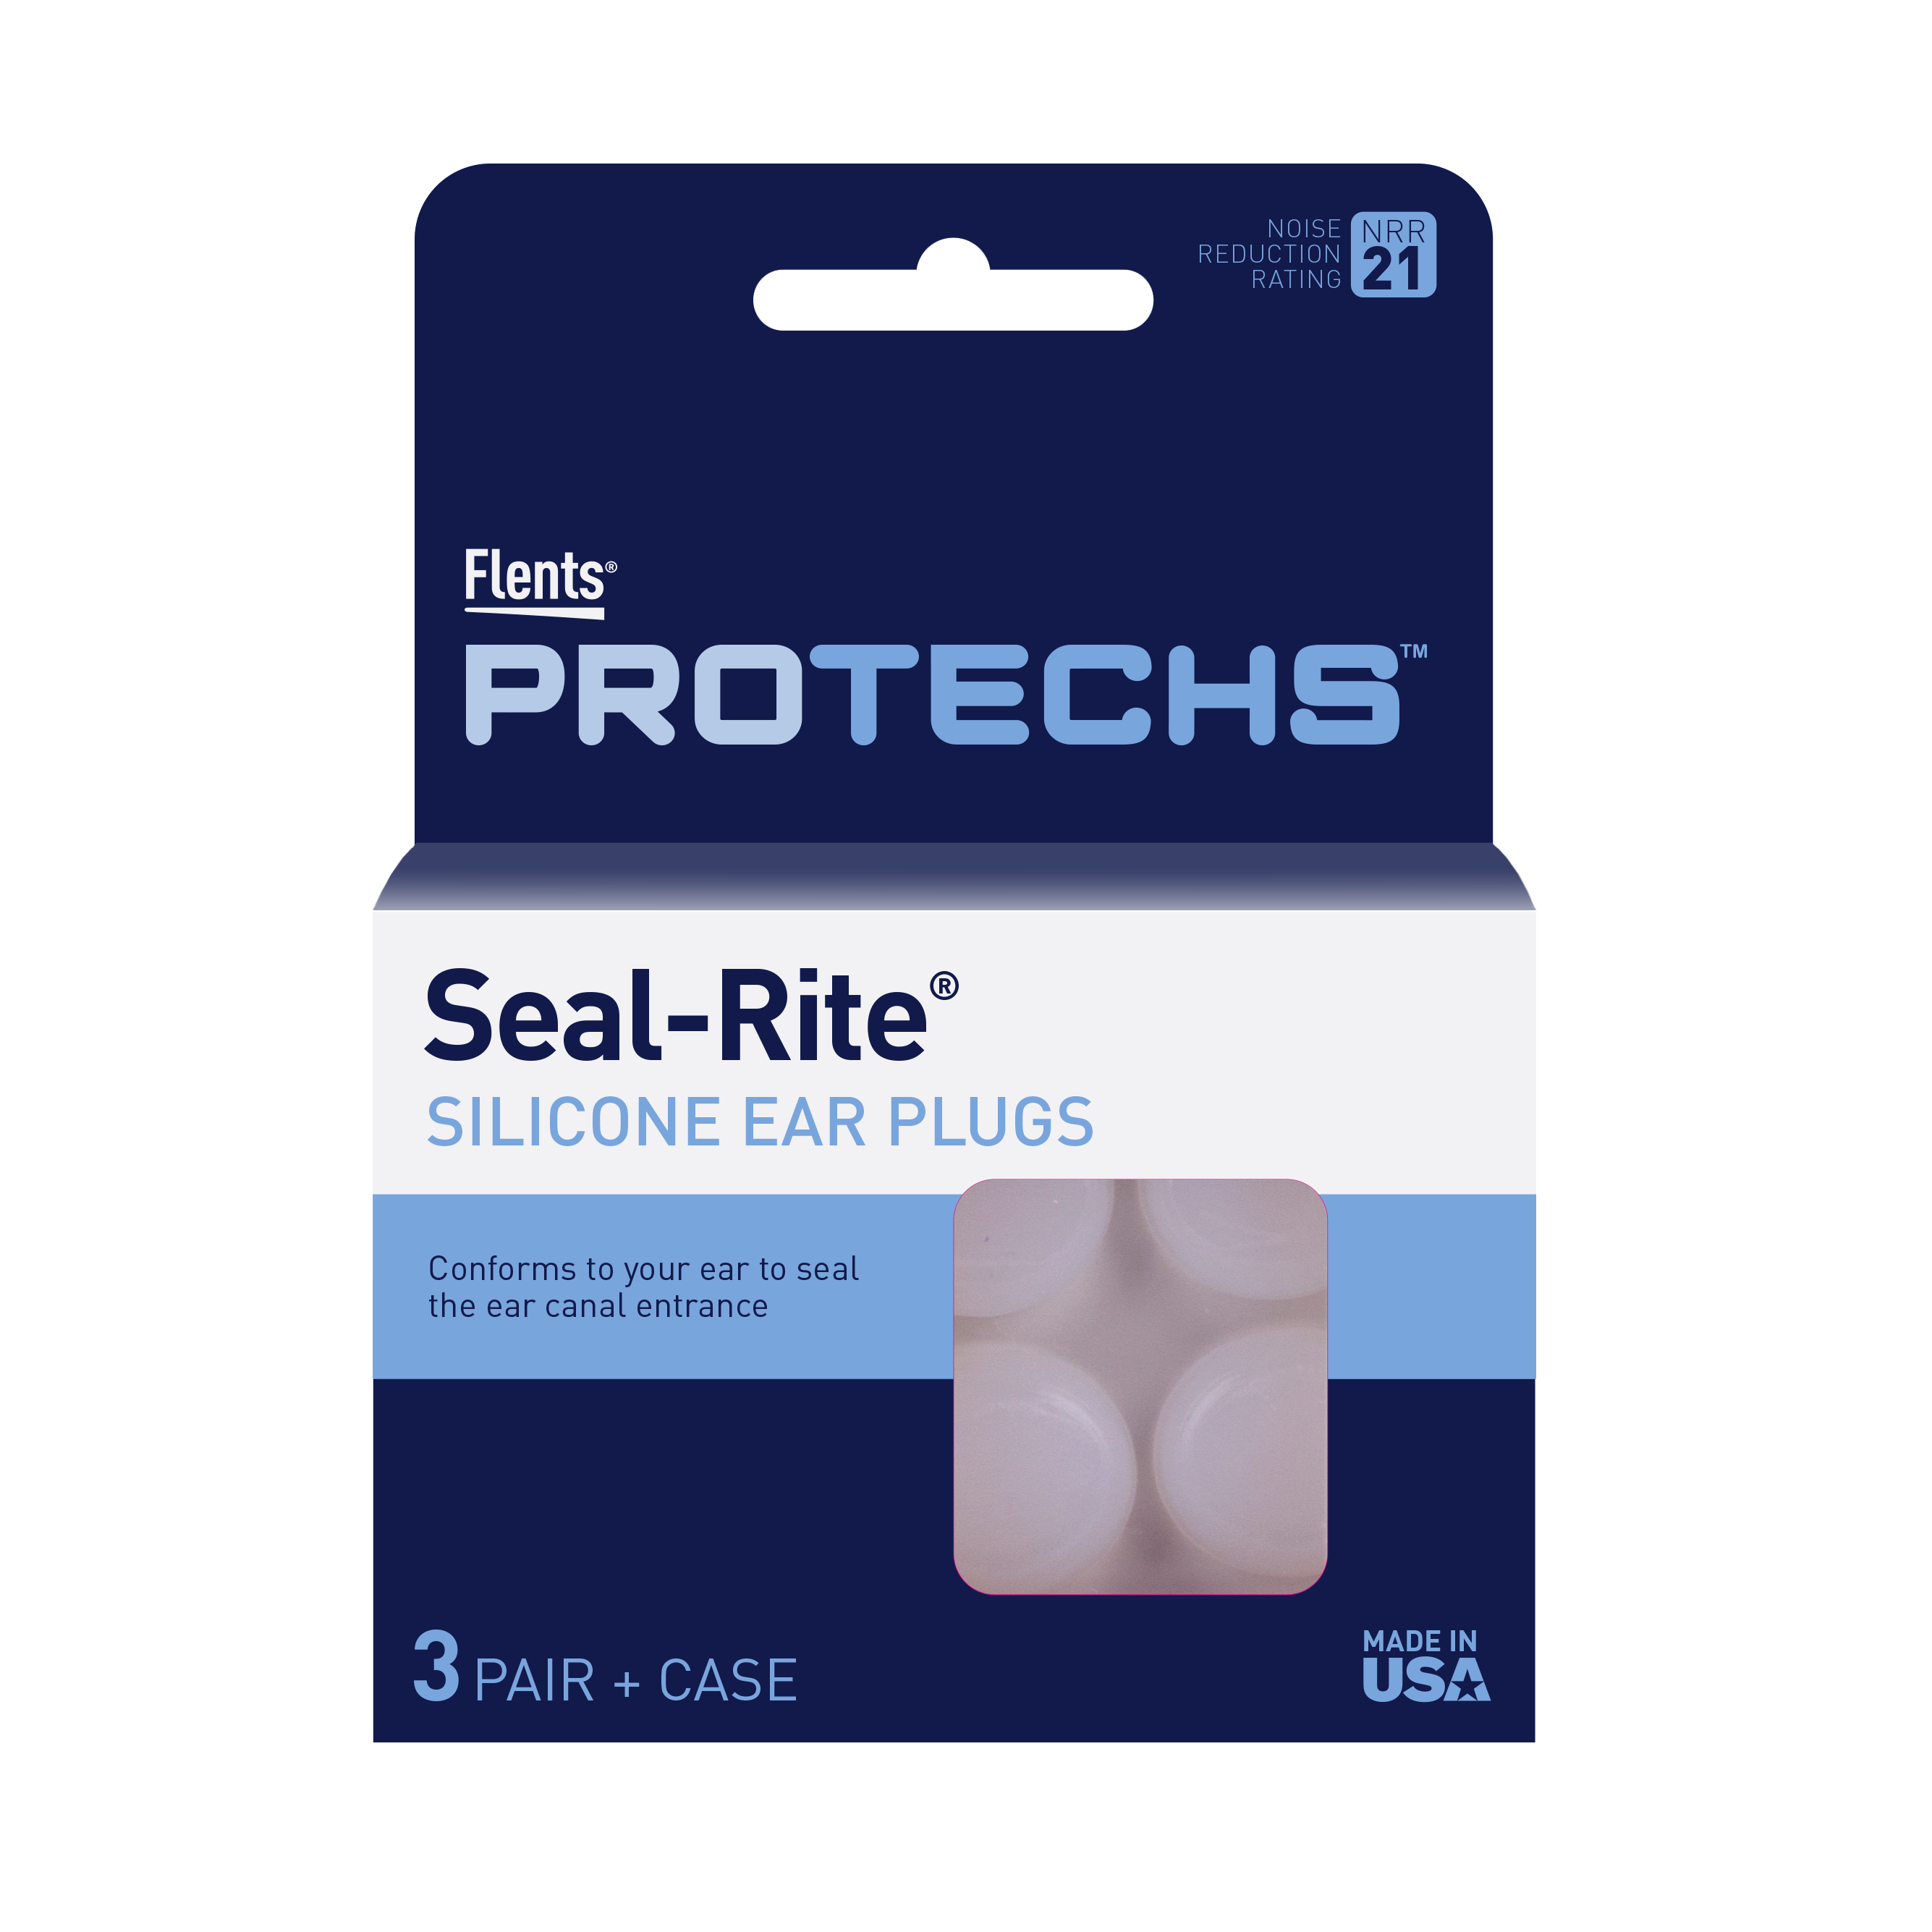 Flents Protechs Seal-Rite Soft Silicone Ear Plugs